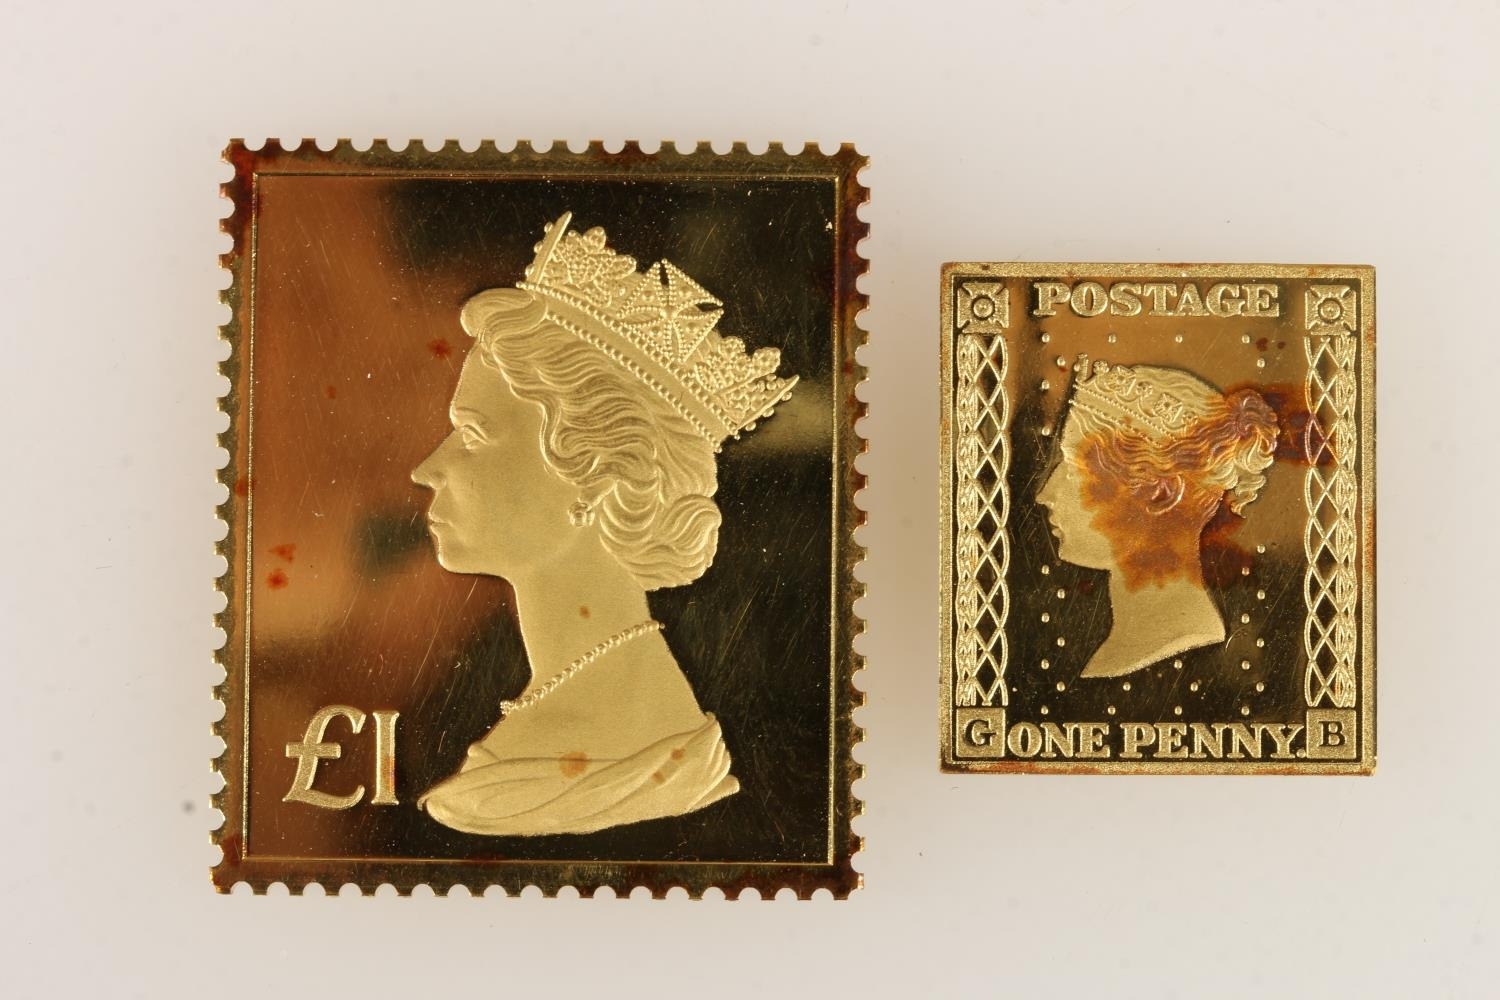 Hallmark Replicas Limited The British Definitive Stamp Replica Issue The Penny Black and The £1 - Image 2 of 3